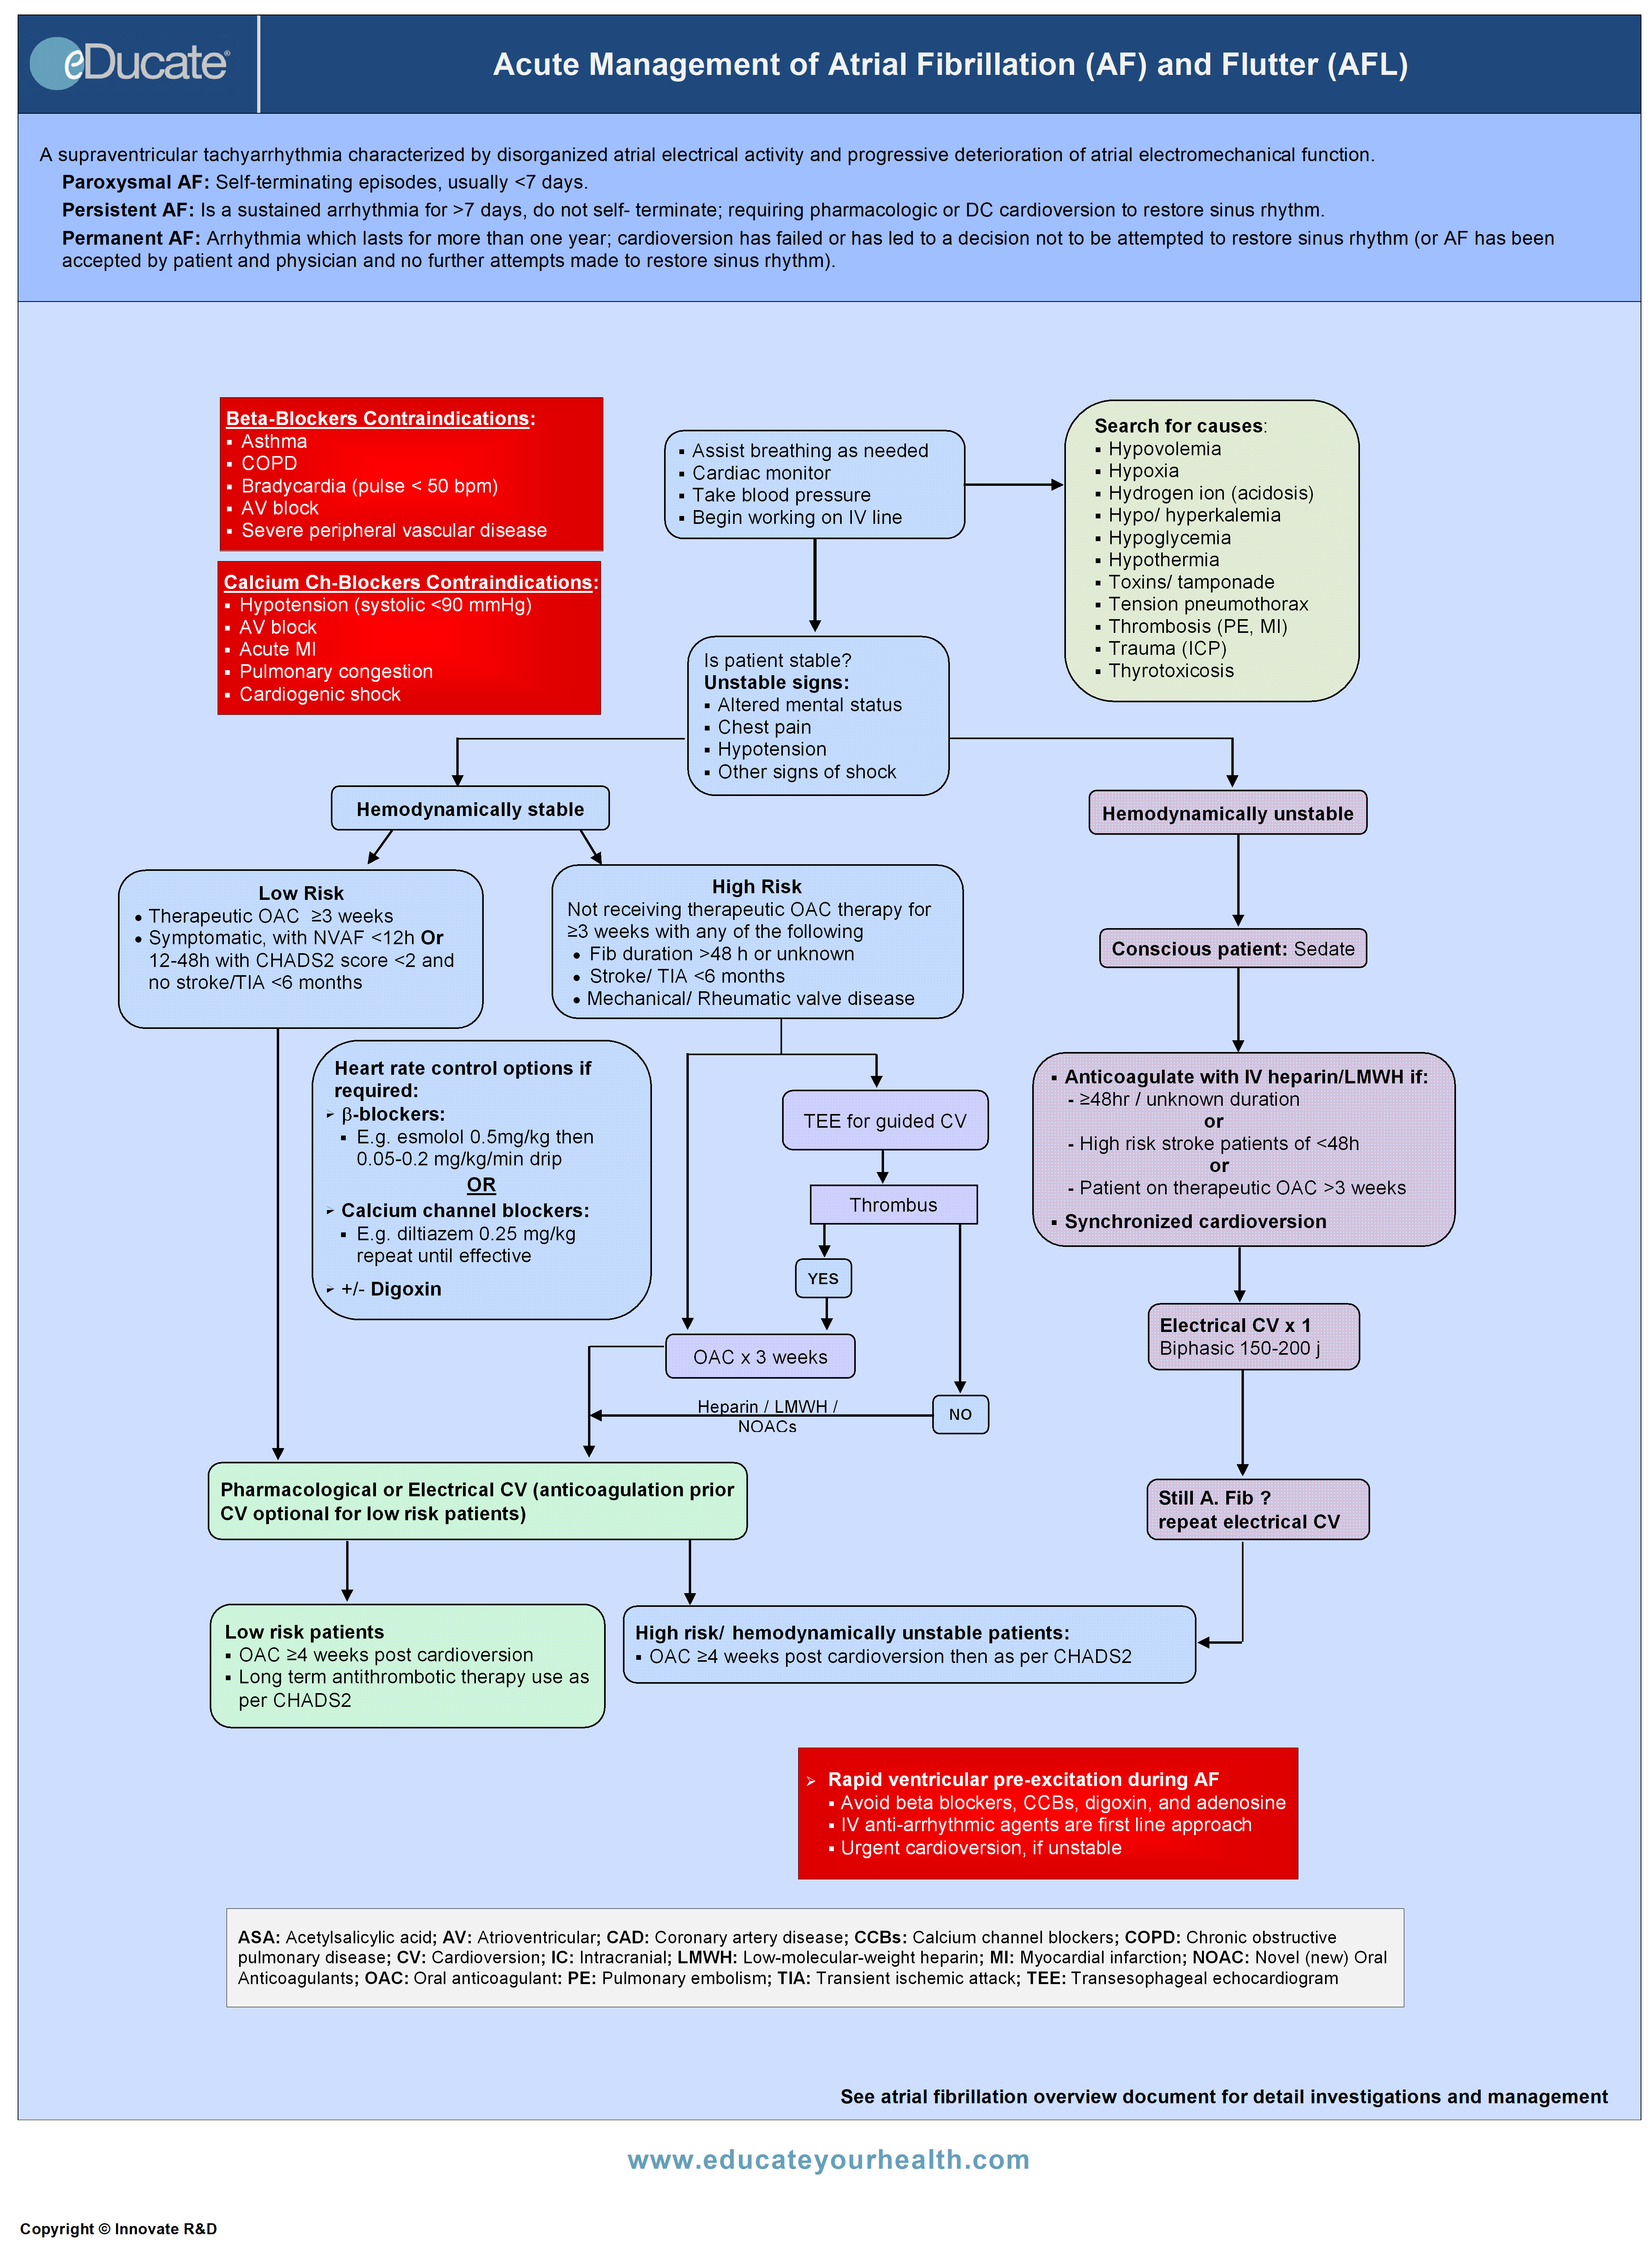 Acute Management of Atrial Fibrillation and Flutter